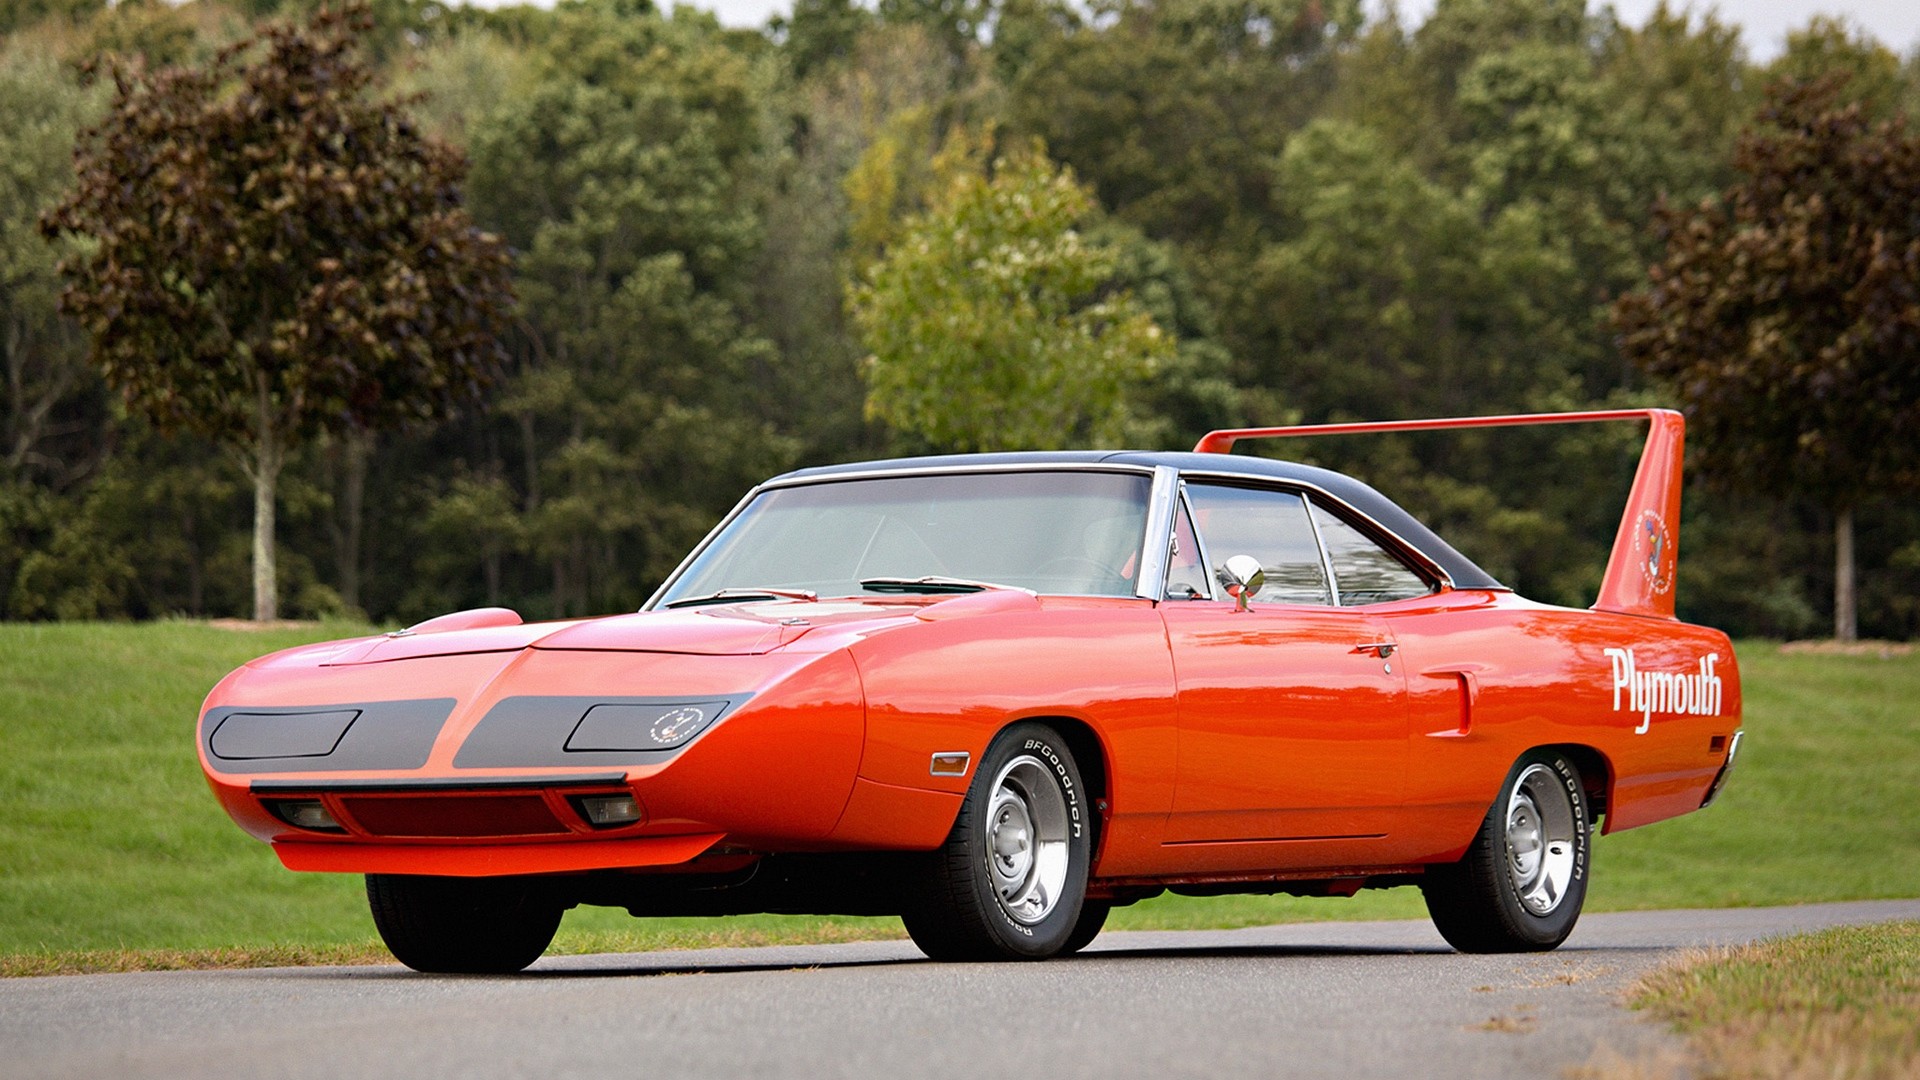 1920x1080  Wallpaper plymouth, road runner, superbird, muscle car, red